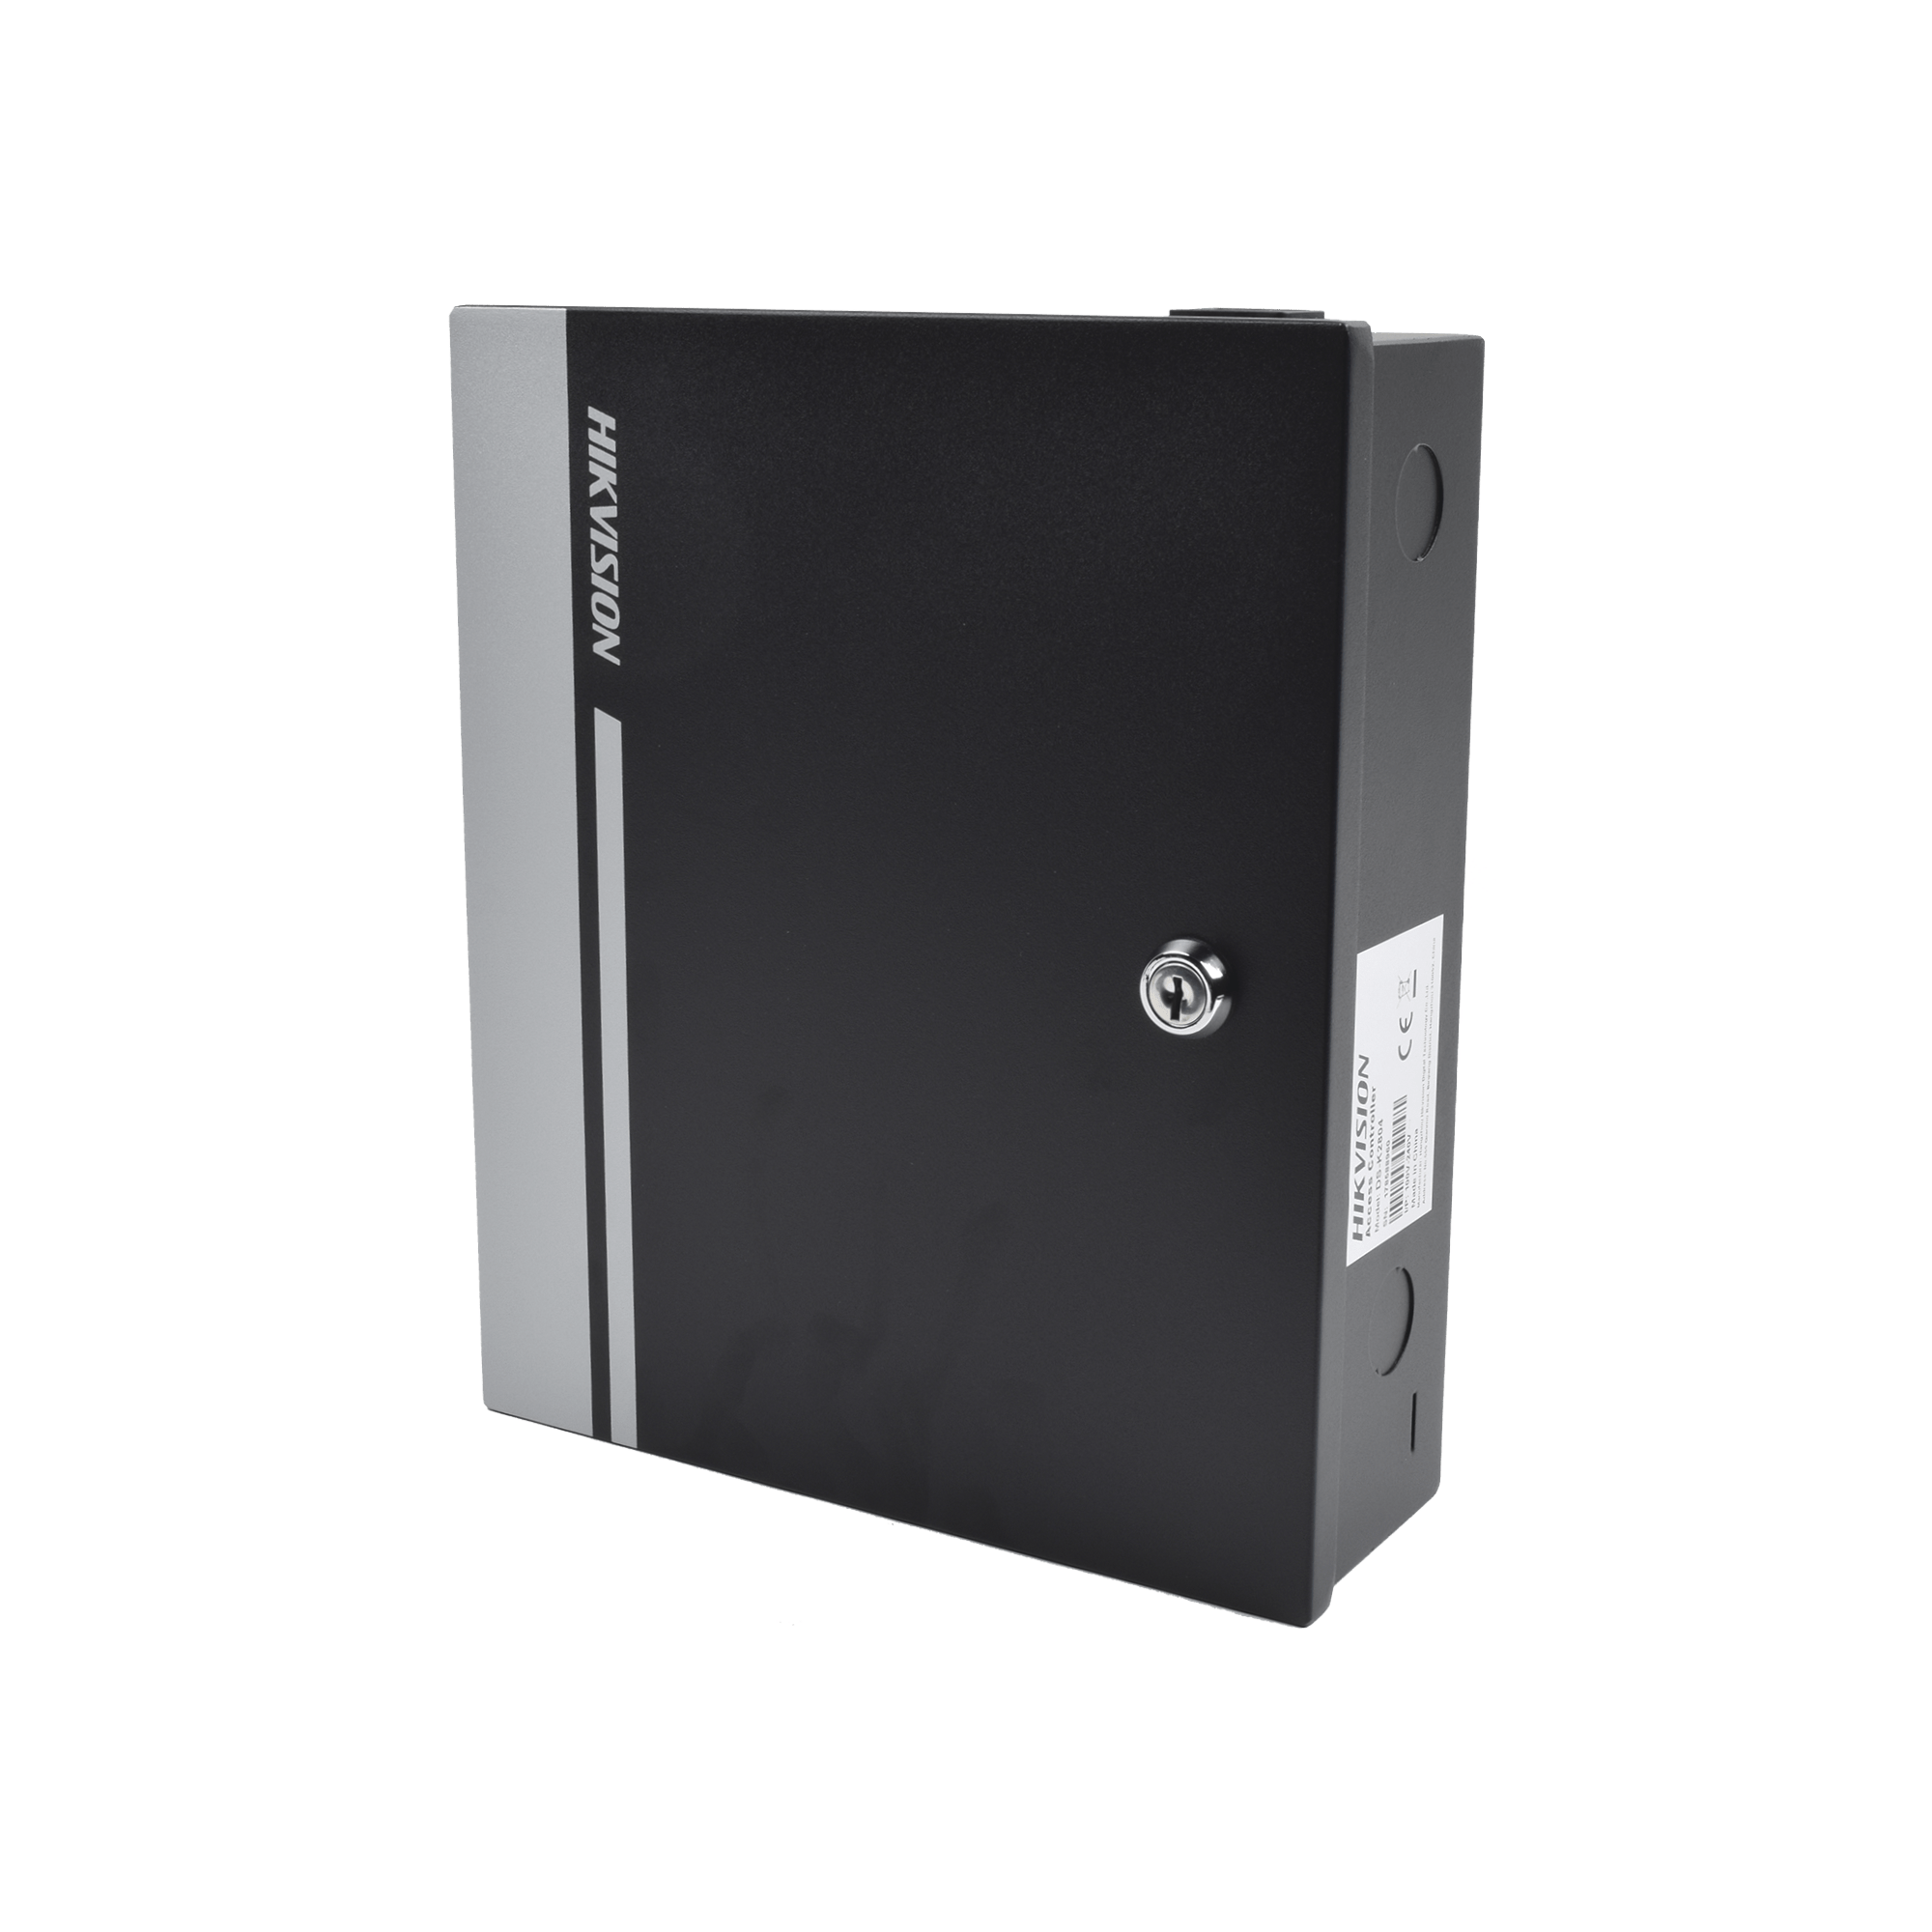 Power supply unit for access control terminal and lock